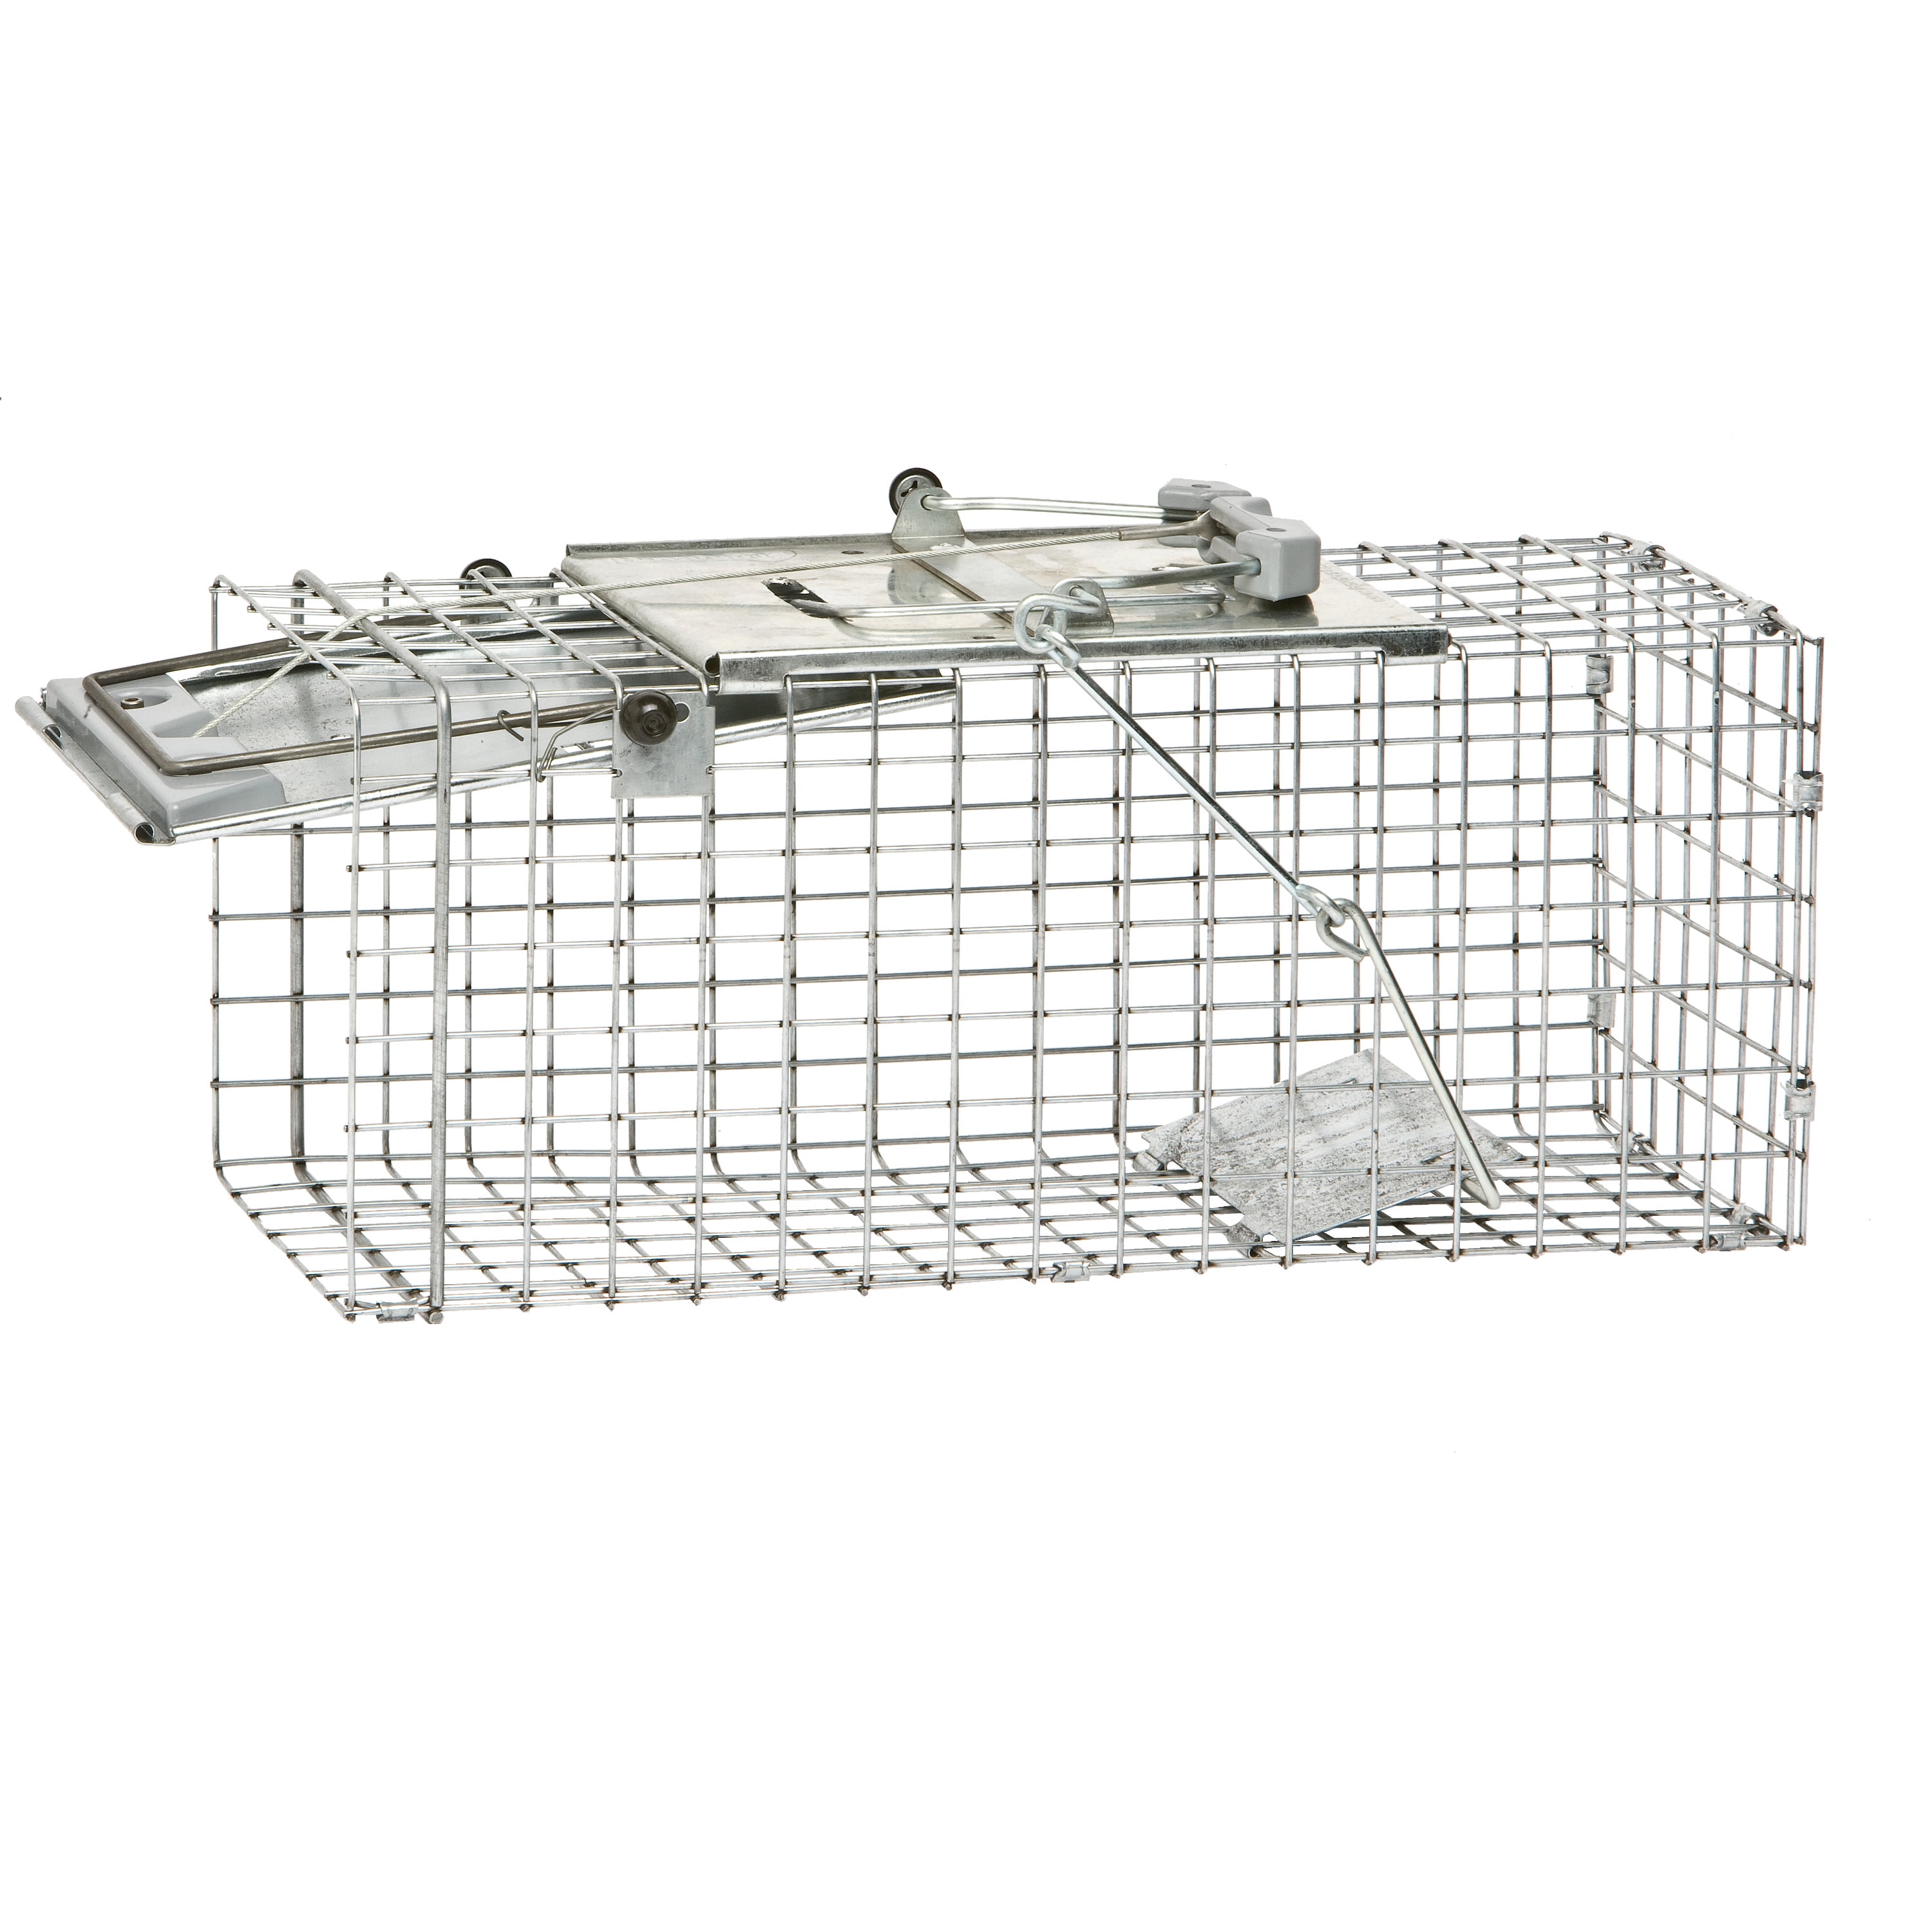 Havahart 1083 Easy Set One-Door Animal Trap for Squirrels and Small Rabbits 